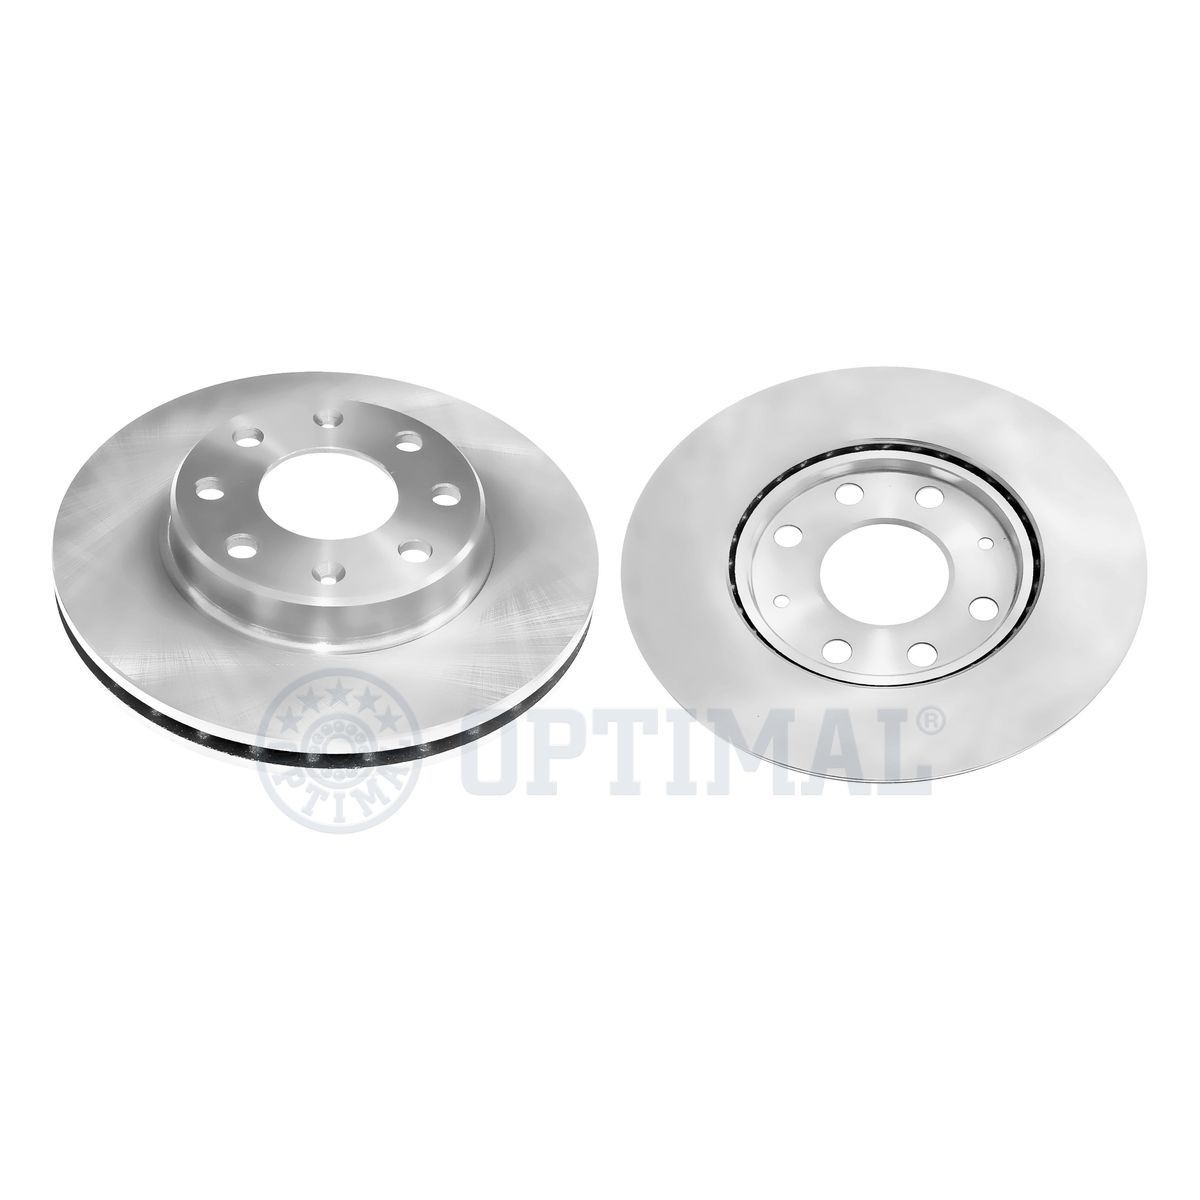 OPTIMAL Front Axle, 236x20mm, 4/8, Vented, Coated Ø: 236mm, Brake Disc Thickness: 20mm Brake rotor BS-8198C buy